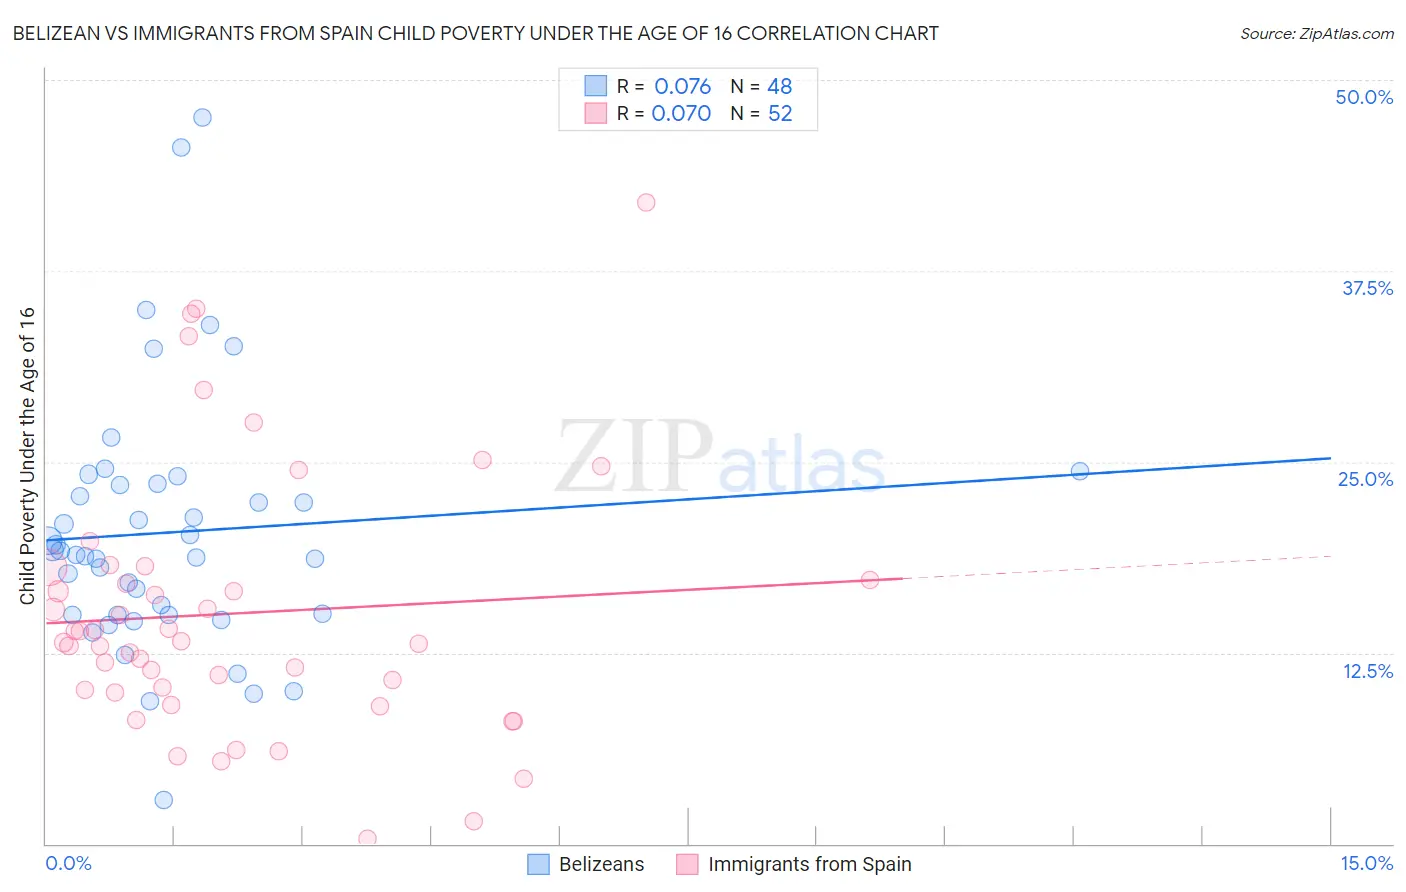 Belizean vs Immigrants from Spain Child Poverty Under the Age of 16